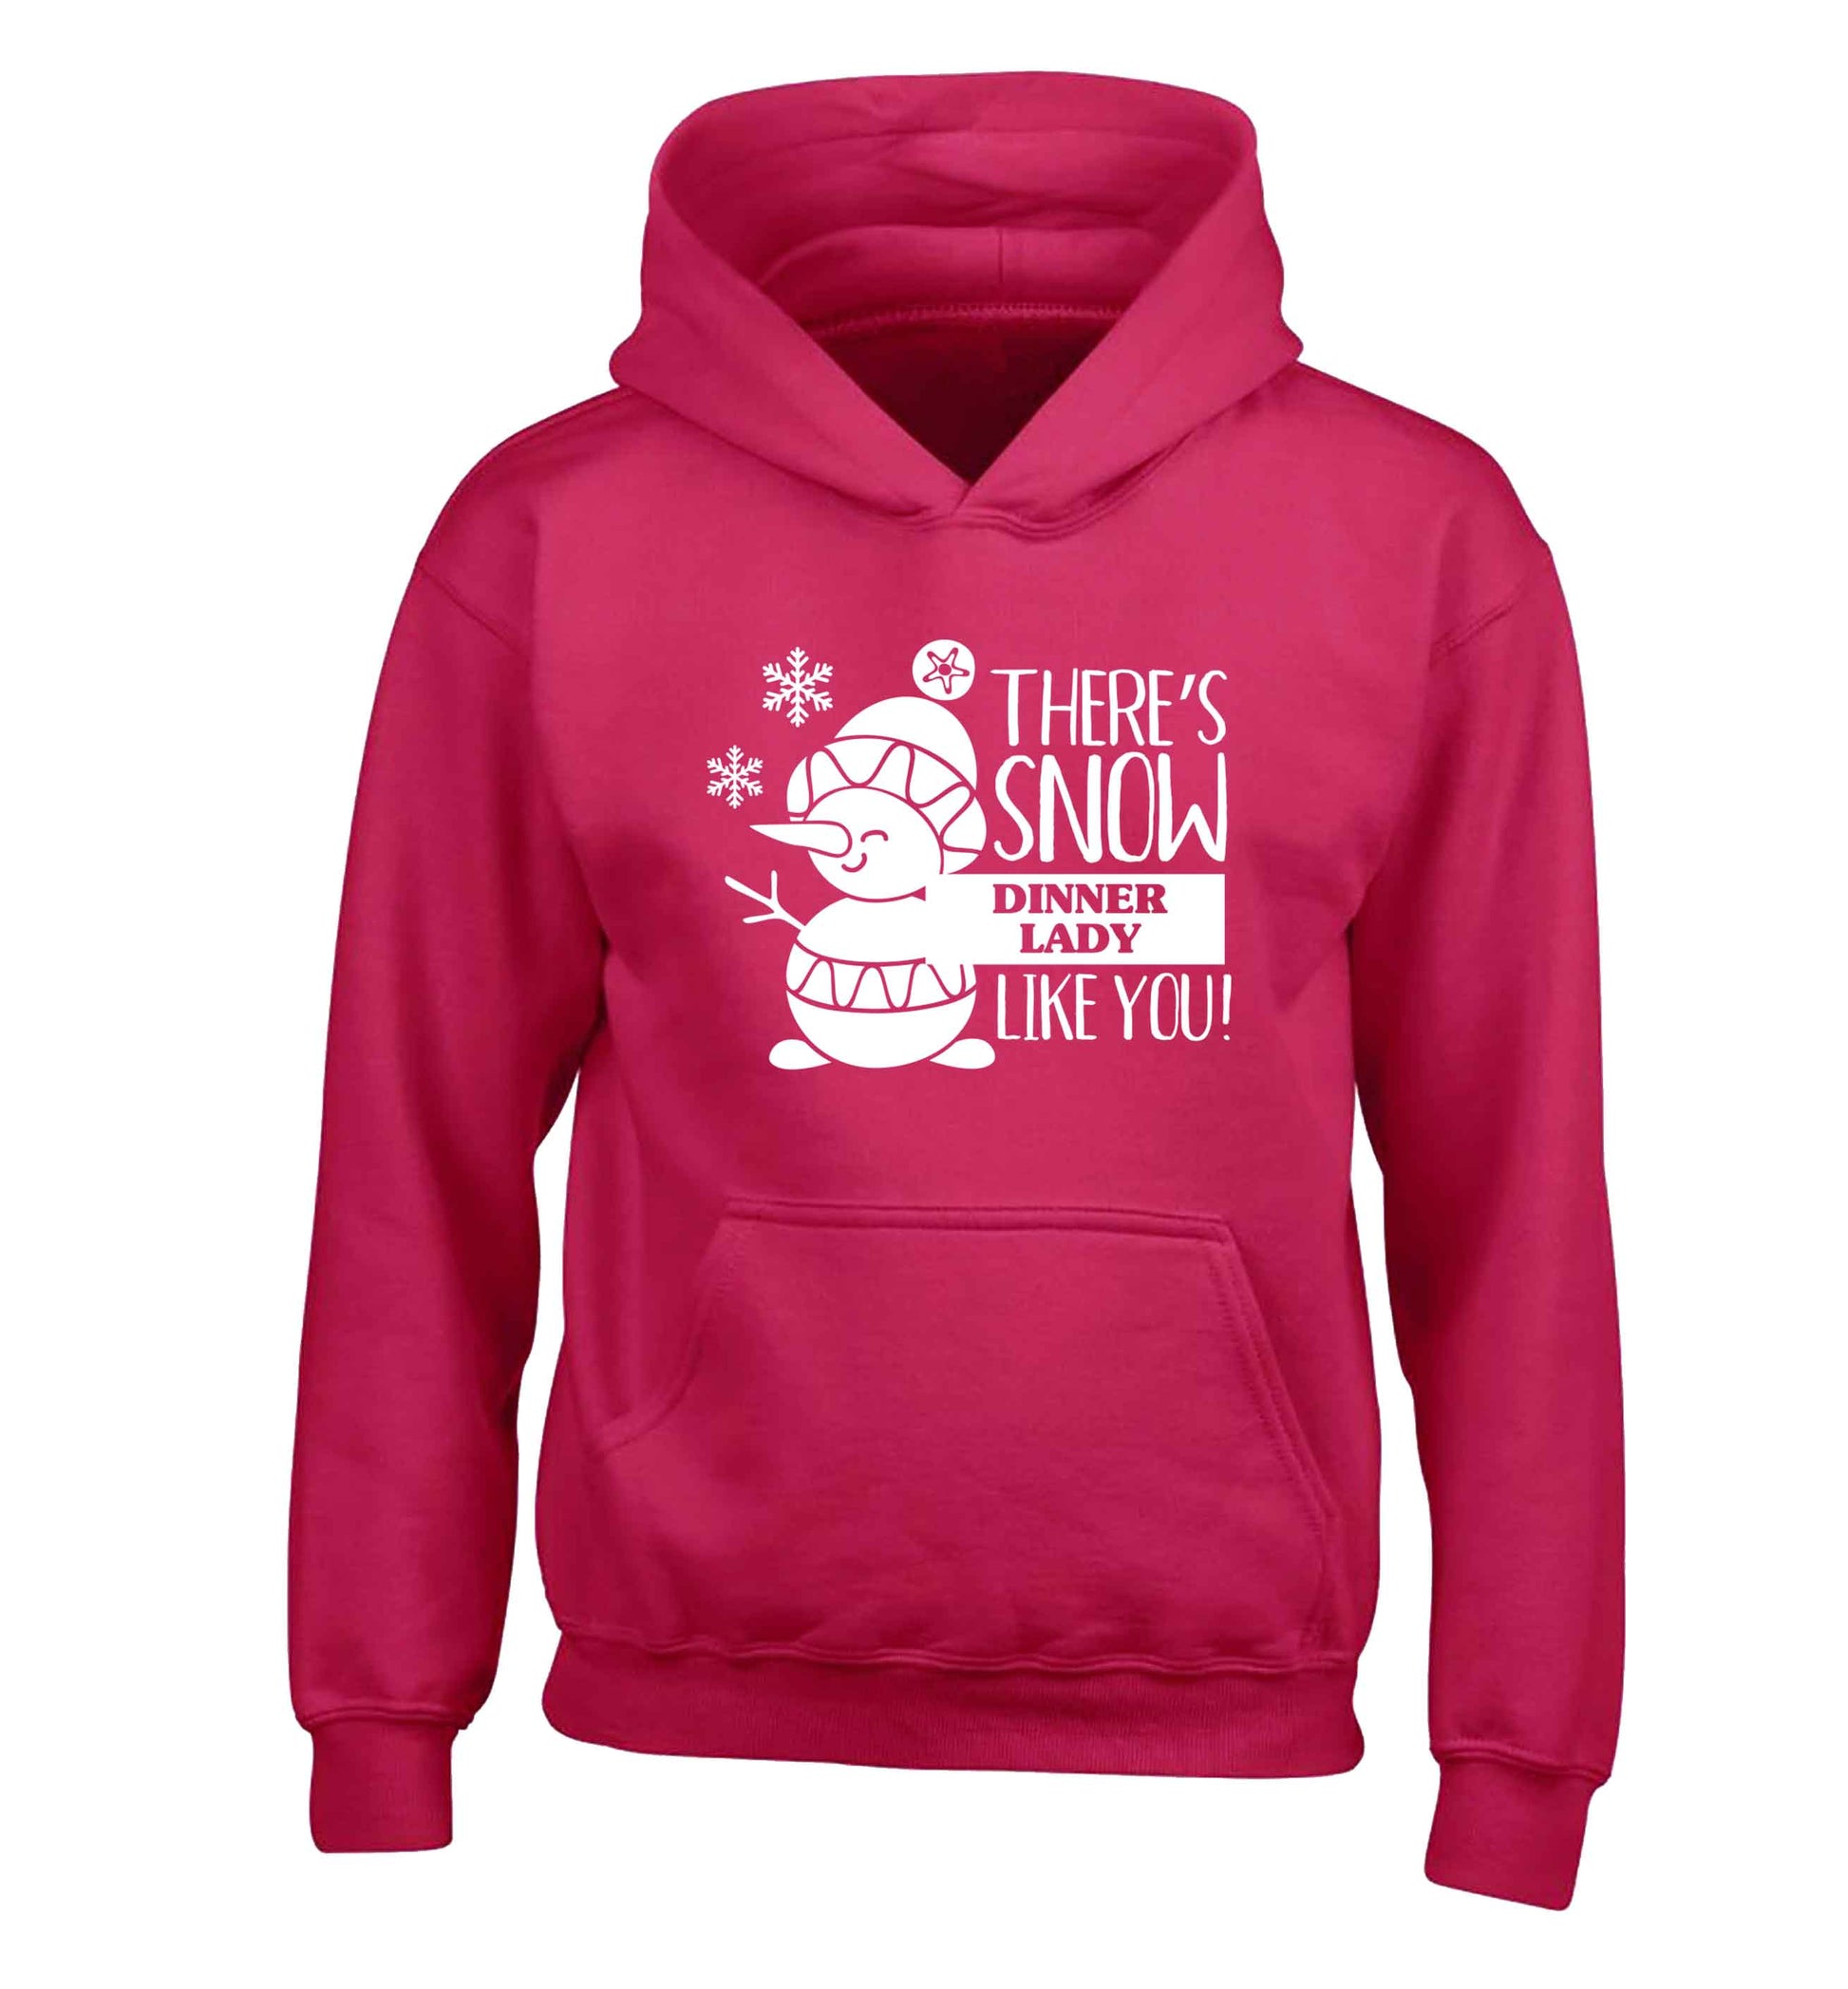 There's snow dinner lady like you children's pink hoodie 12-13 Years